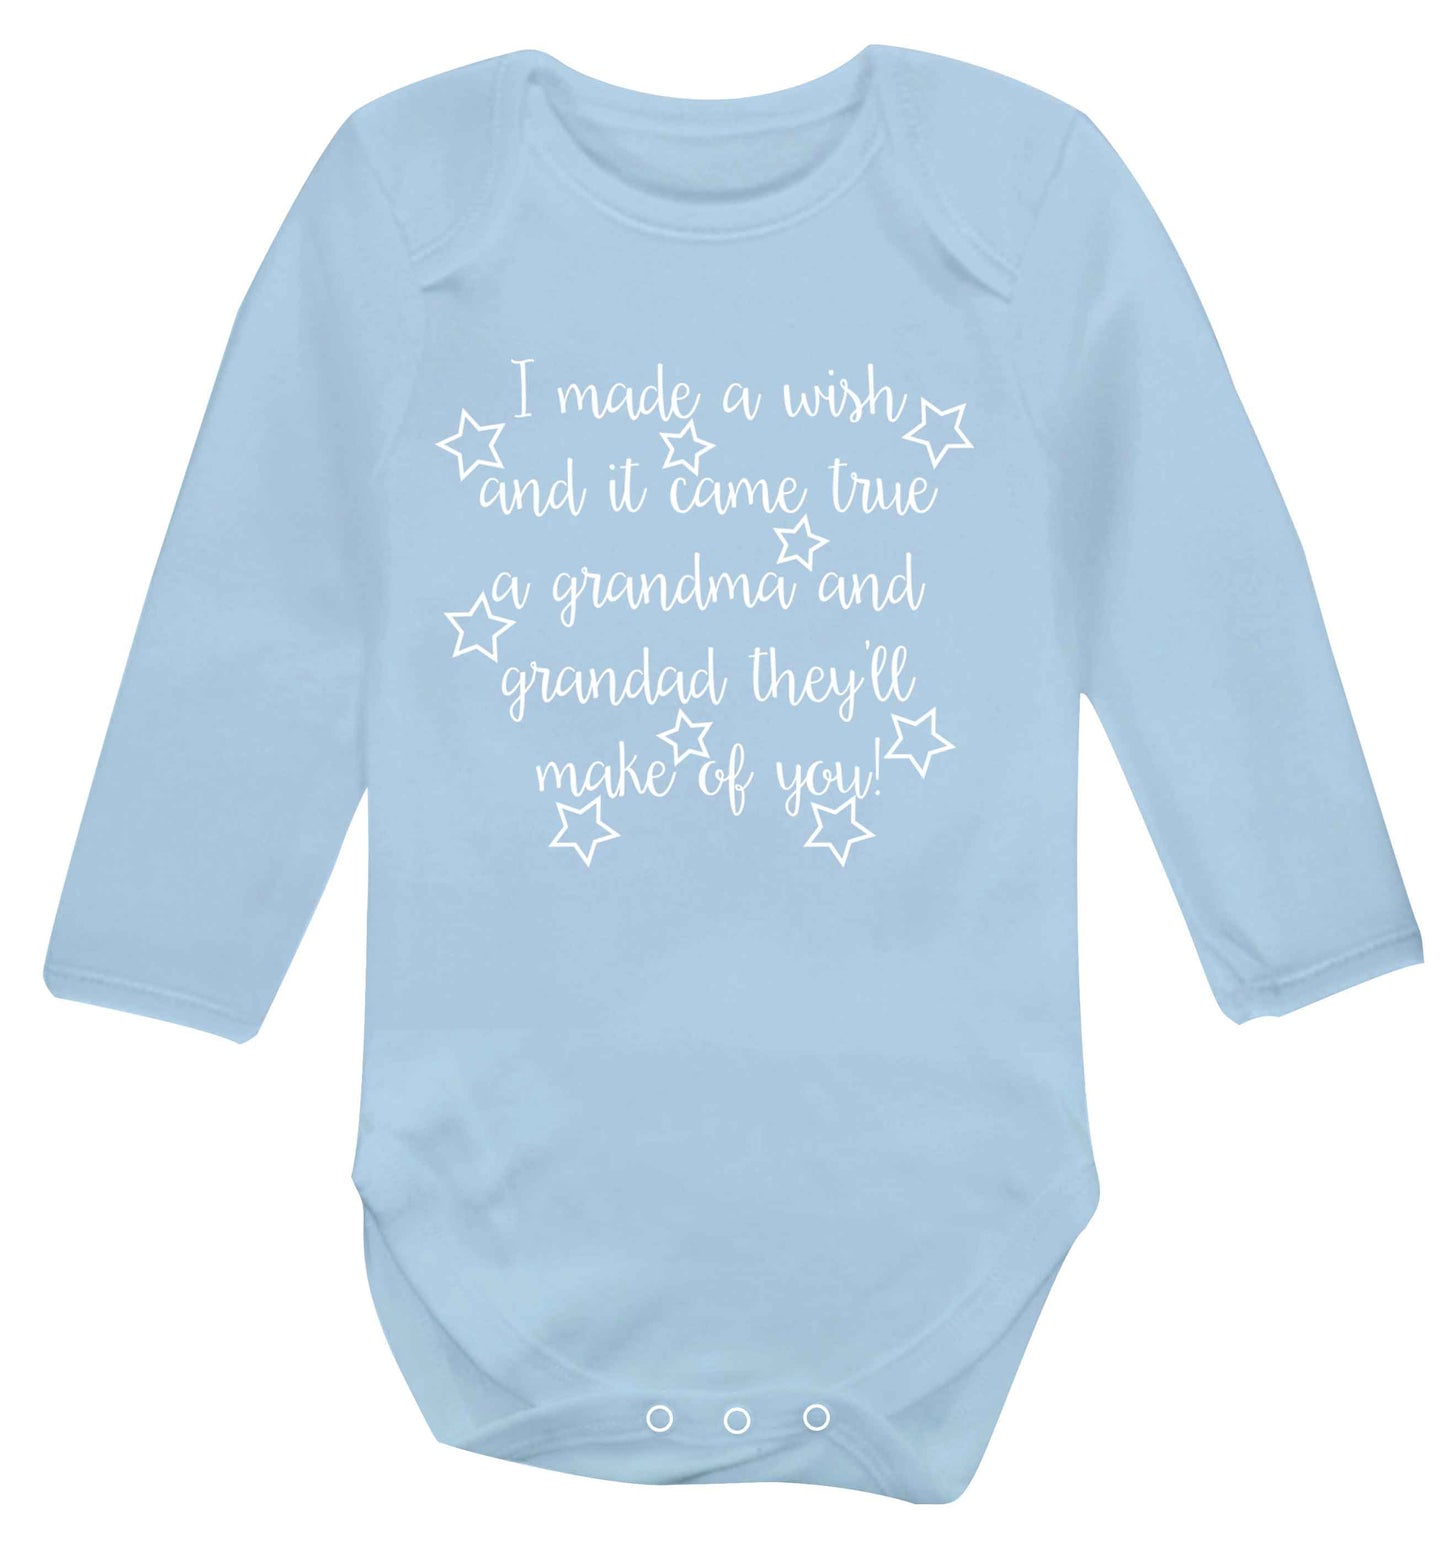 I made a wish and it came true a grandma and grandad they'll make of you! Baby Vest long sleeved pale blue 6-12 months